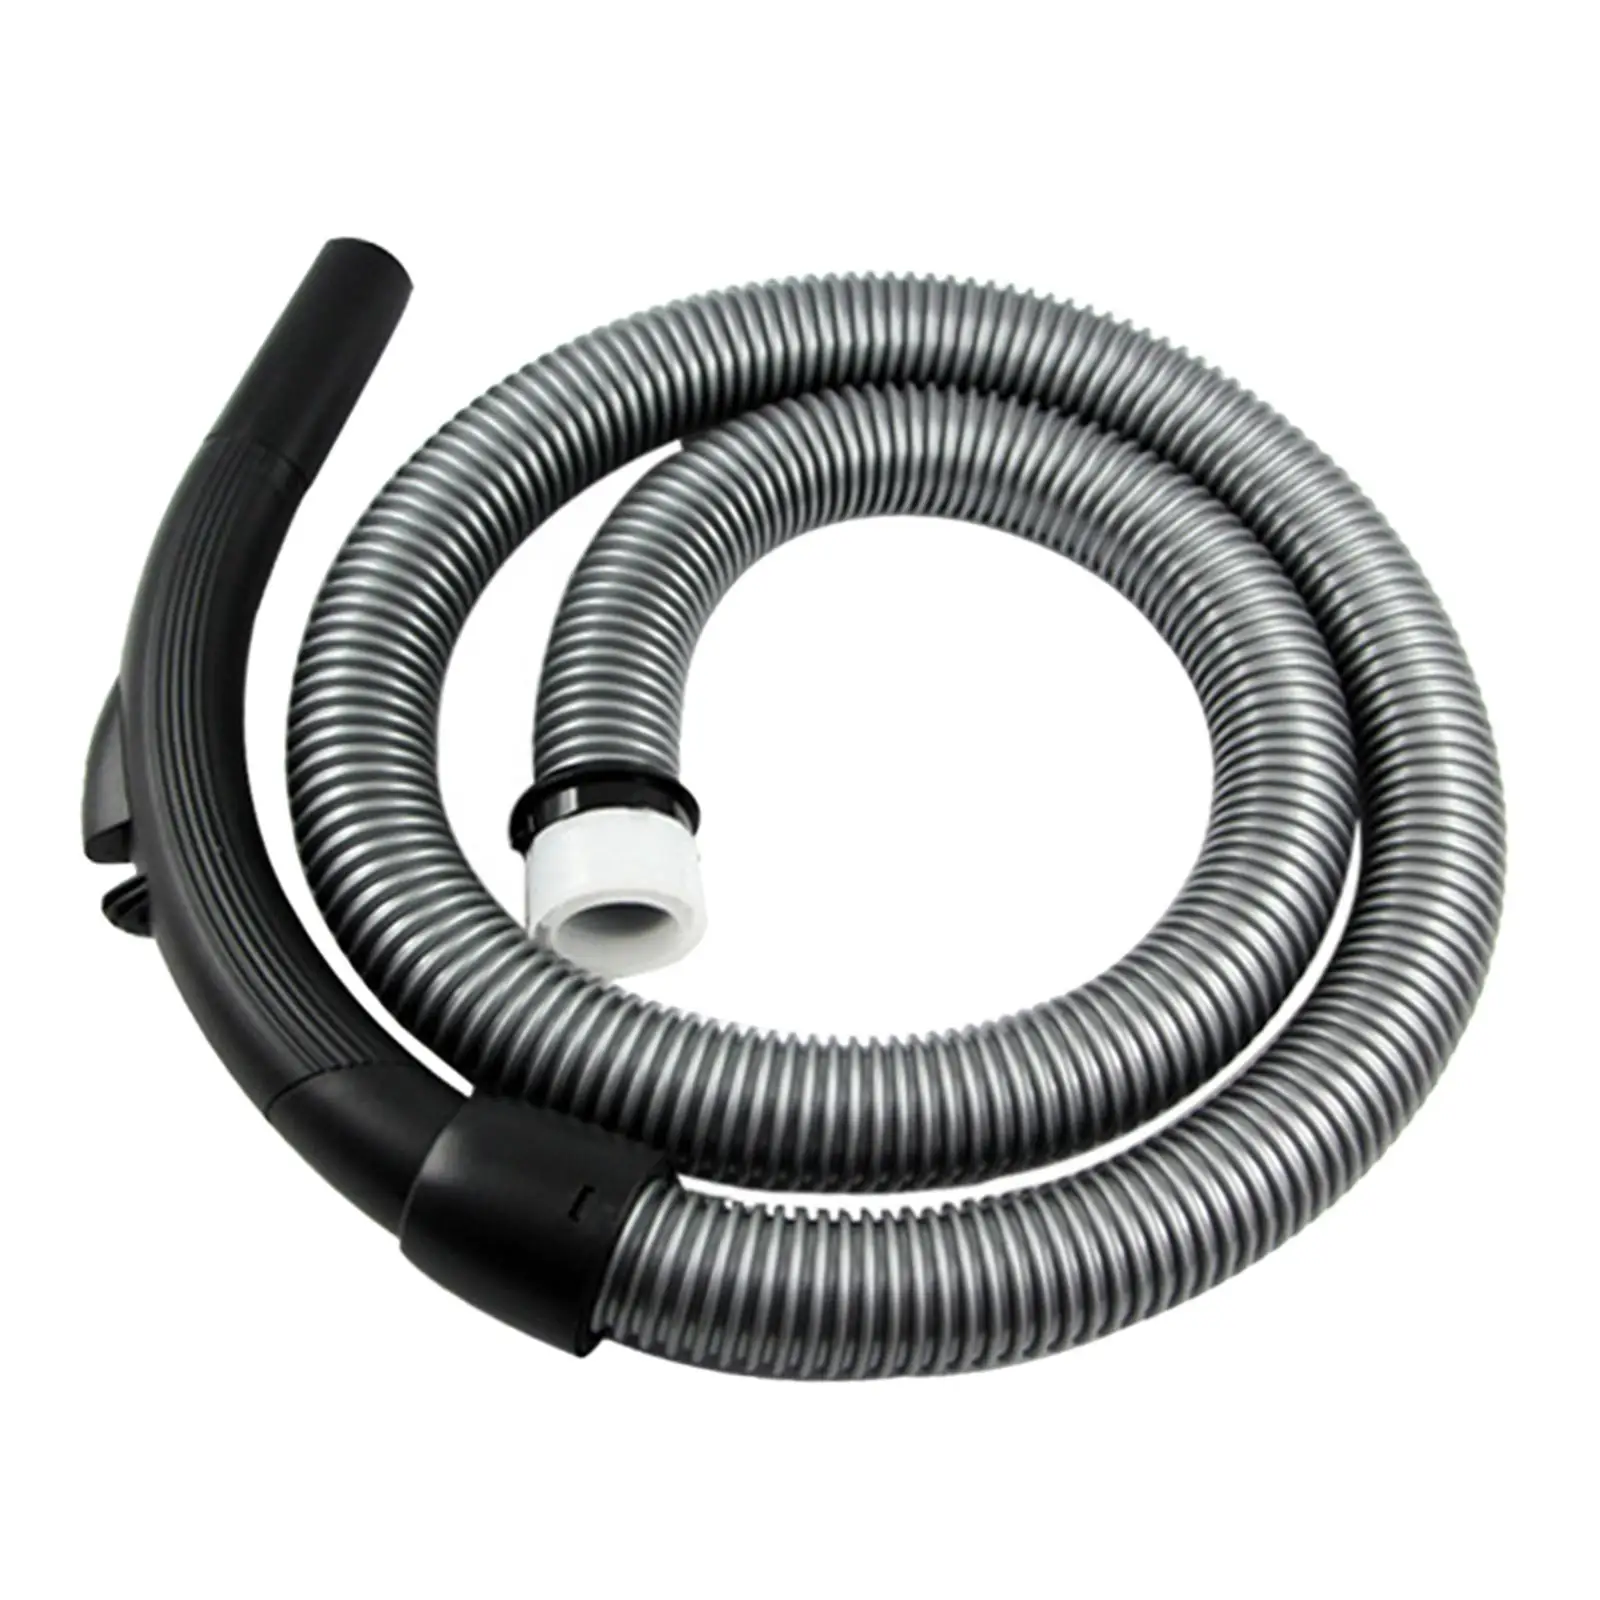 Universal Vacuum Hose Replacement Extension Pipe Hose Kit 32mm Dust Collection Vacuum Cleaner Accessories Quick Release 1.8M